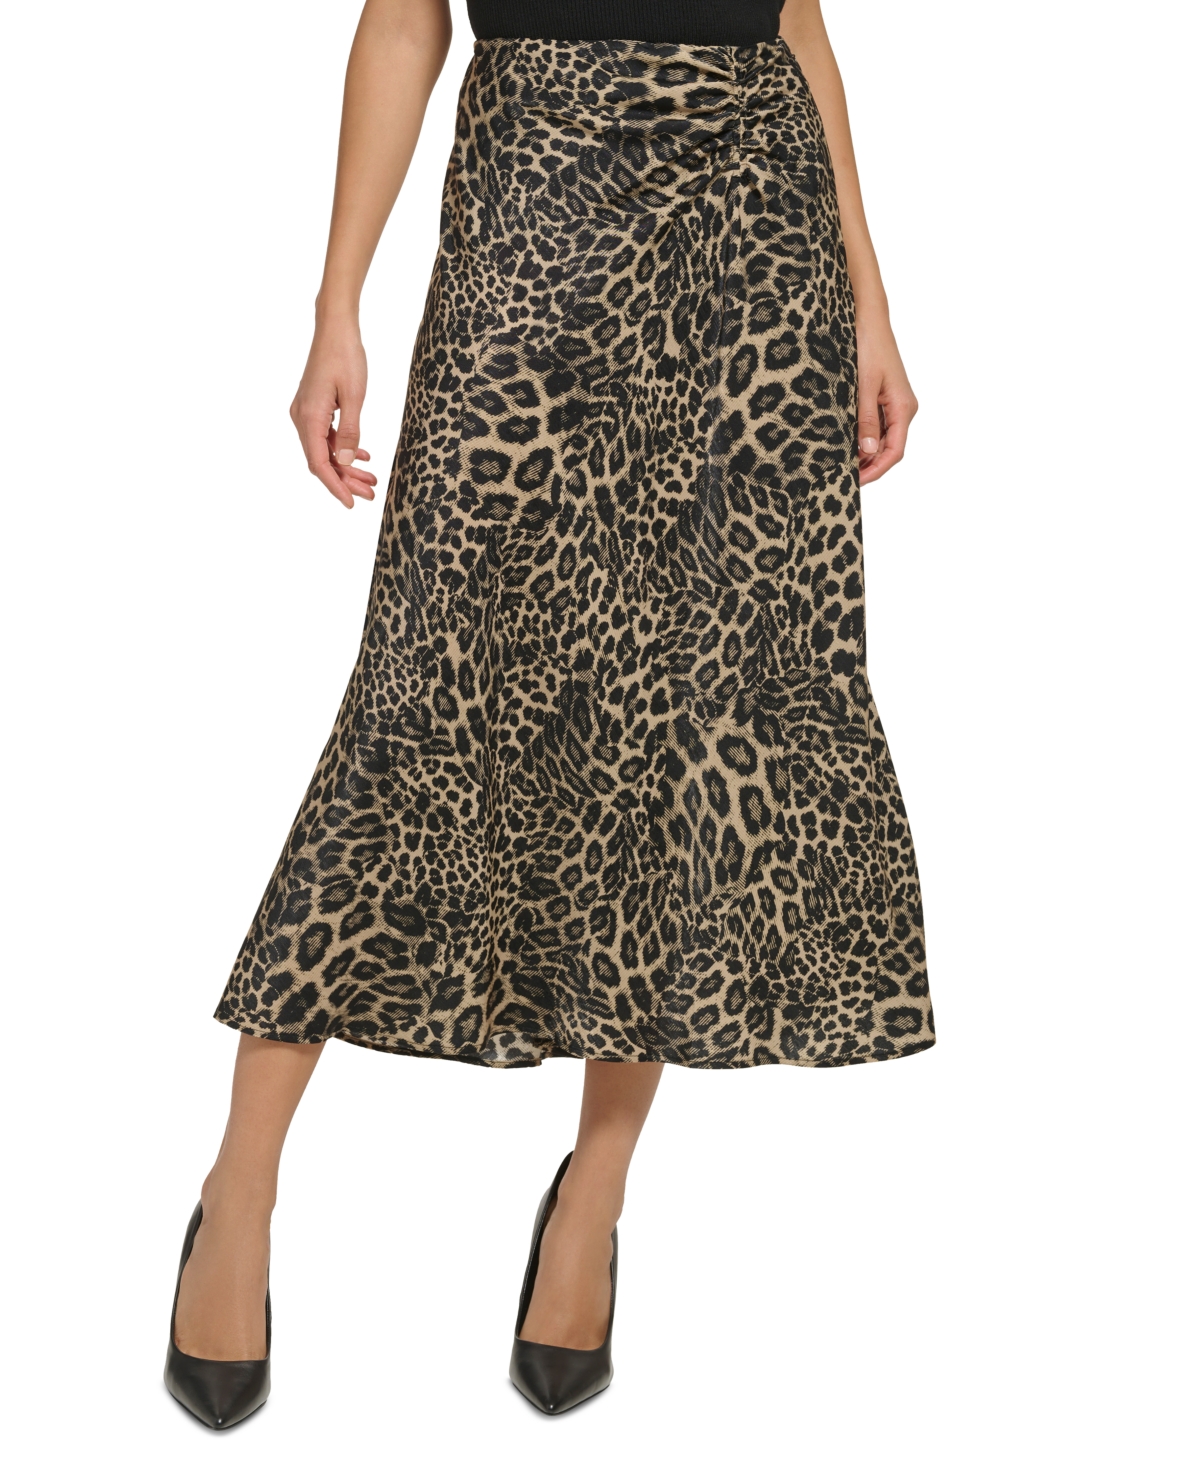 DKNY WOMEN'S PRINTED RUCHED SATIN SKIRT